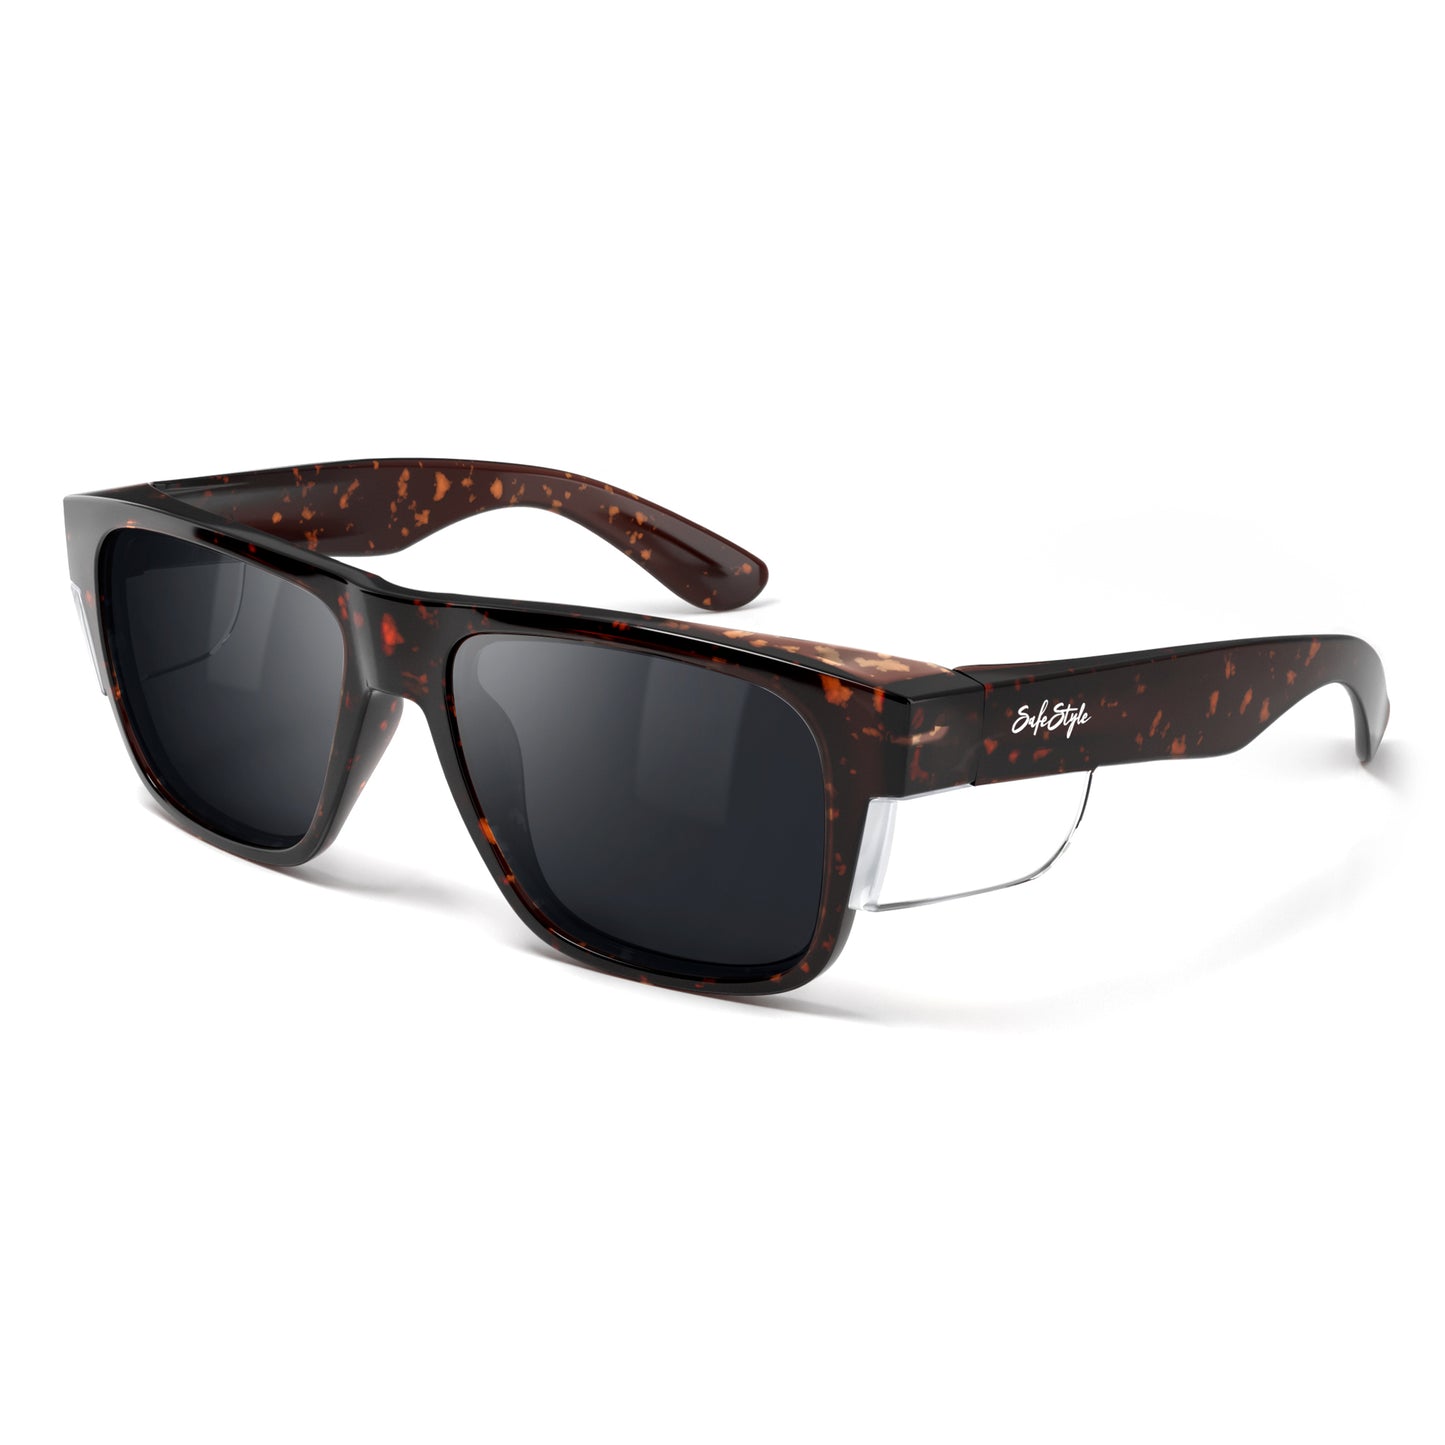 SafeStyle Fusions Brown Torts Frame /Polarised UV400